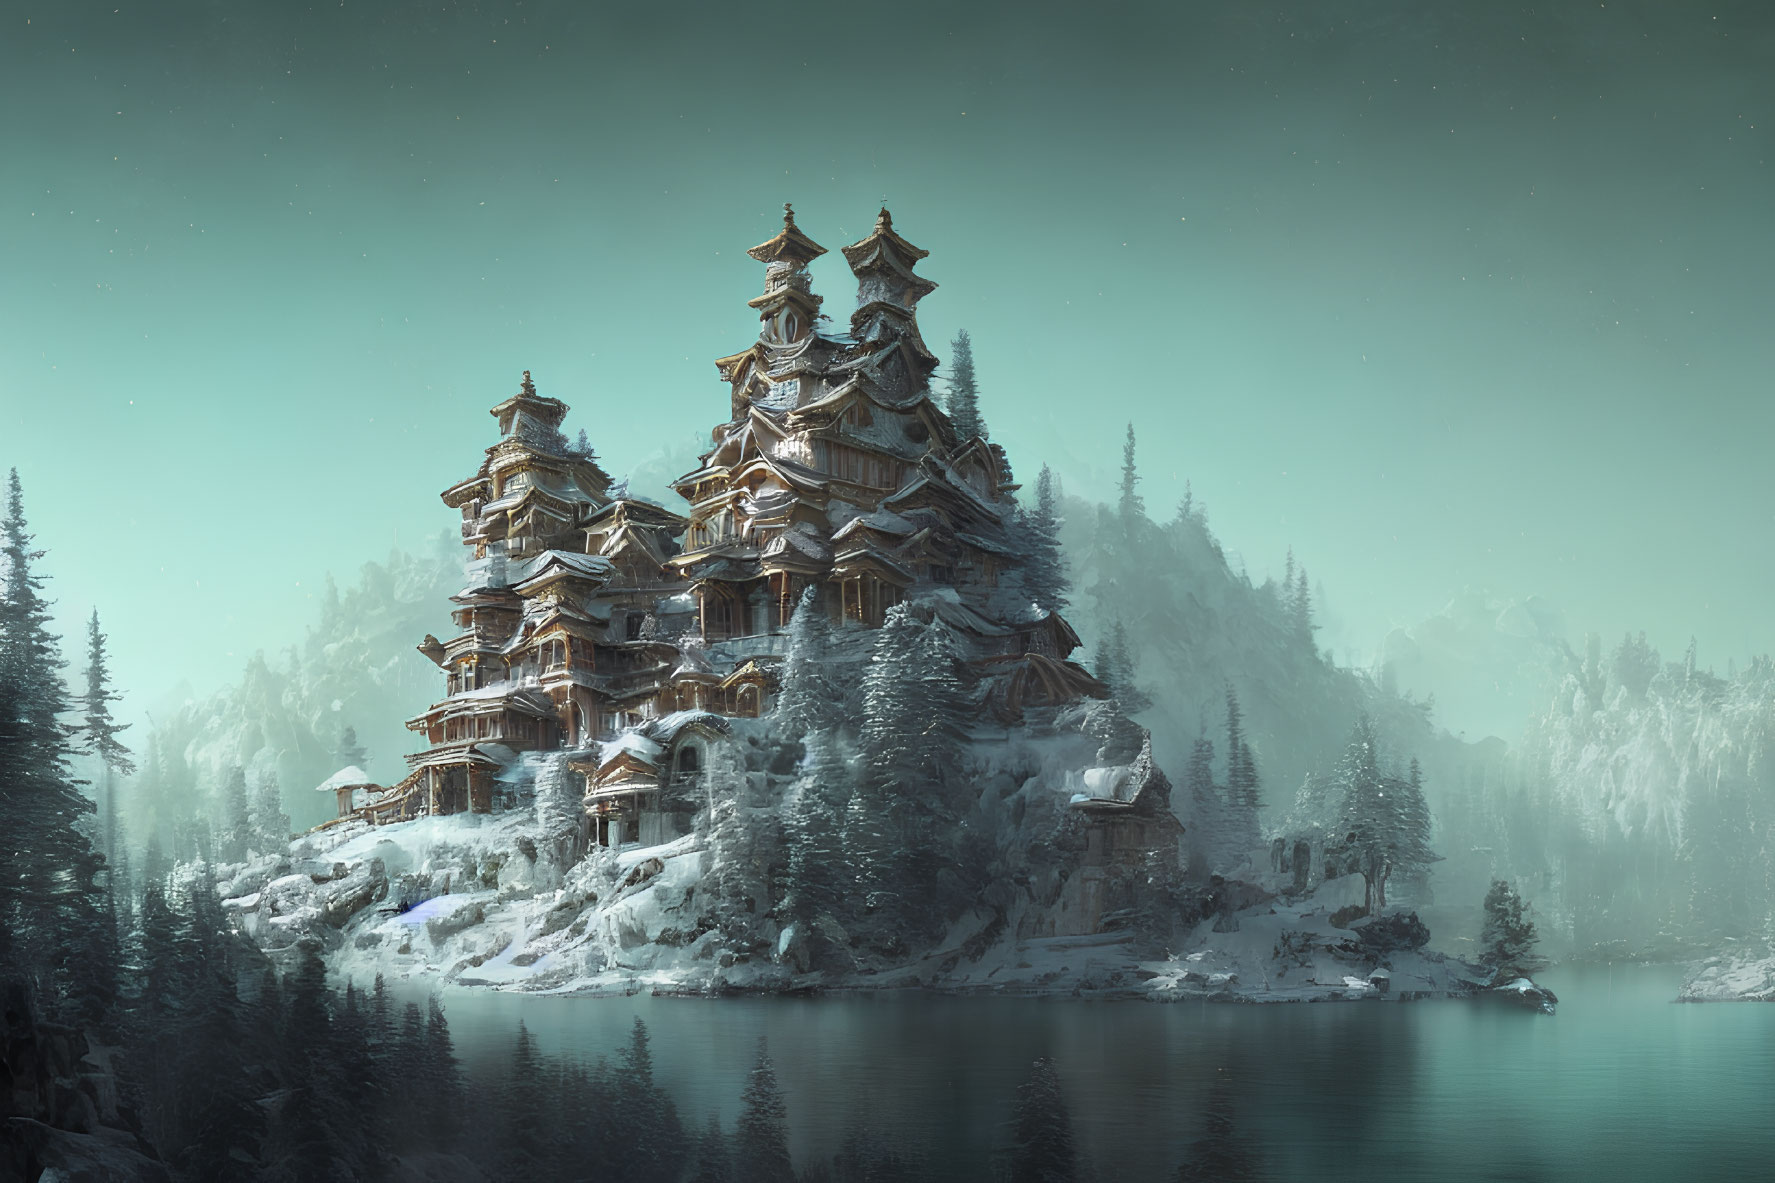 Snowy forest landscape with multi-tiered pagoda near tranquil lake